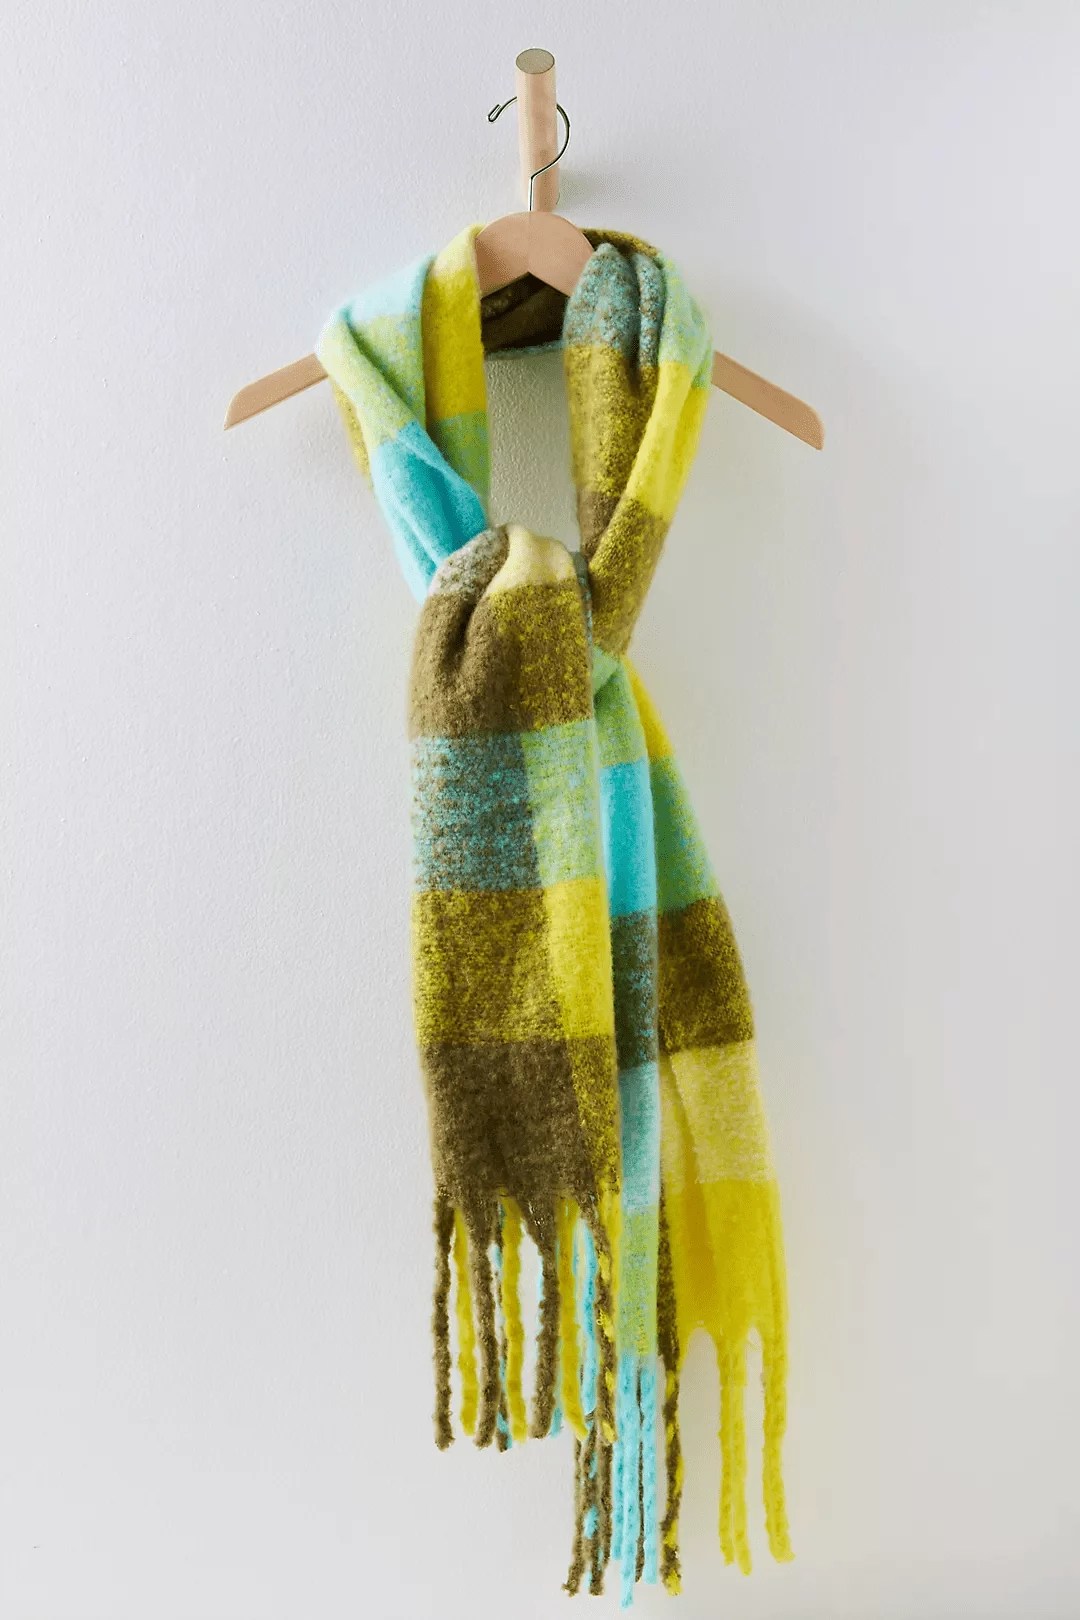 free people scarf that's a swap for the acne studios scarf on a light gray background